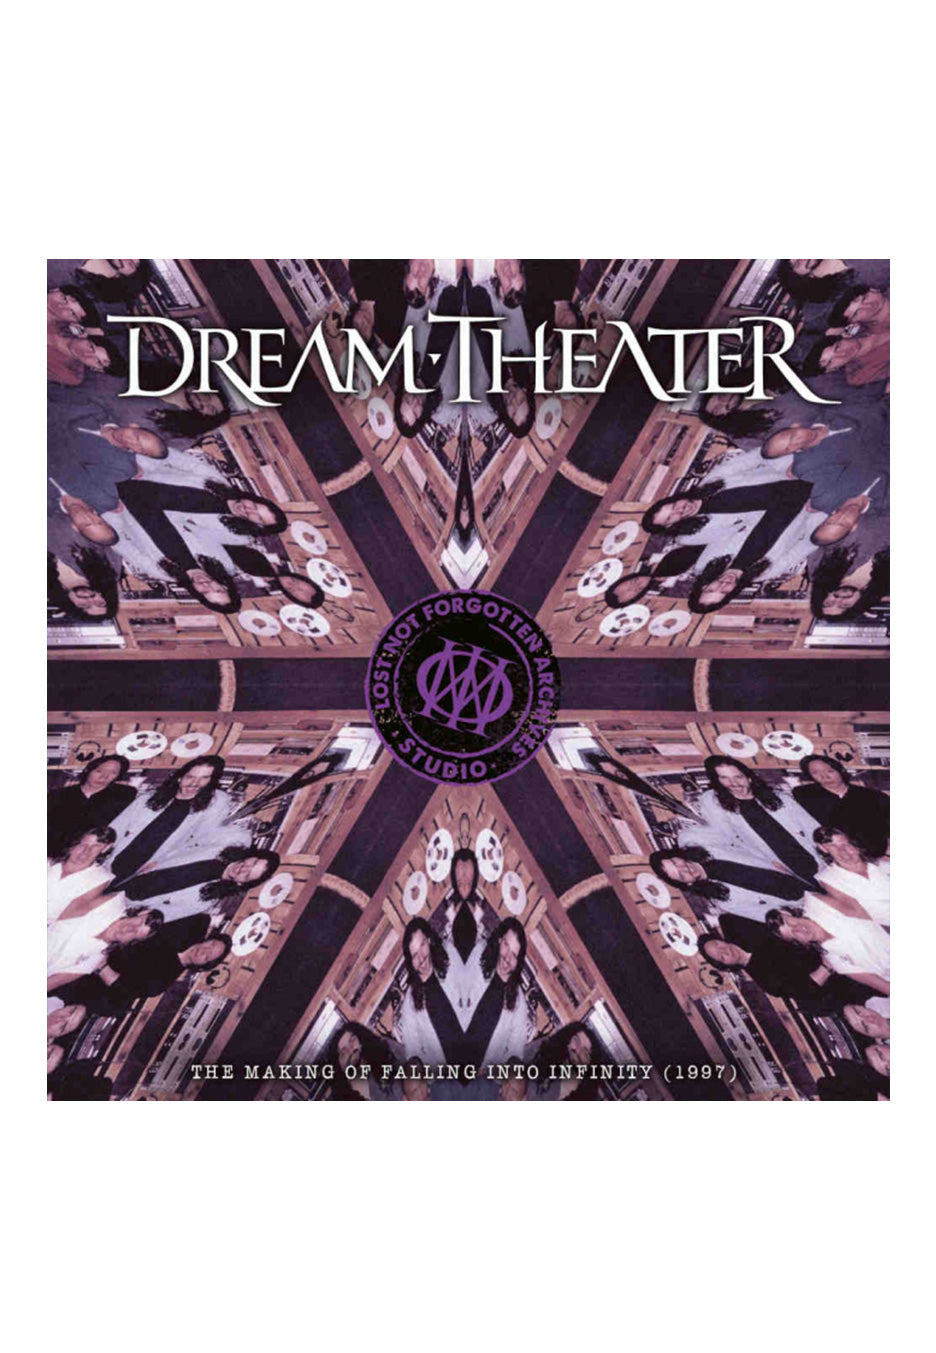 Dream Theater - Lost Not Forgotten Archives: The Making of Falling Into Infinity (1997) Special Edition - Digipak CD 